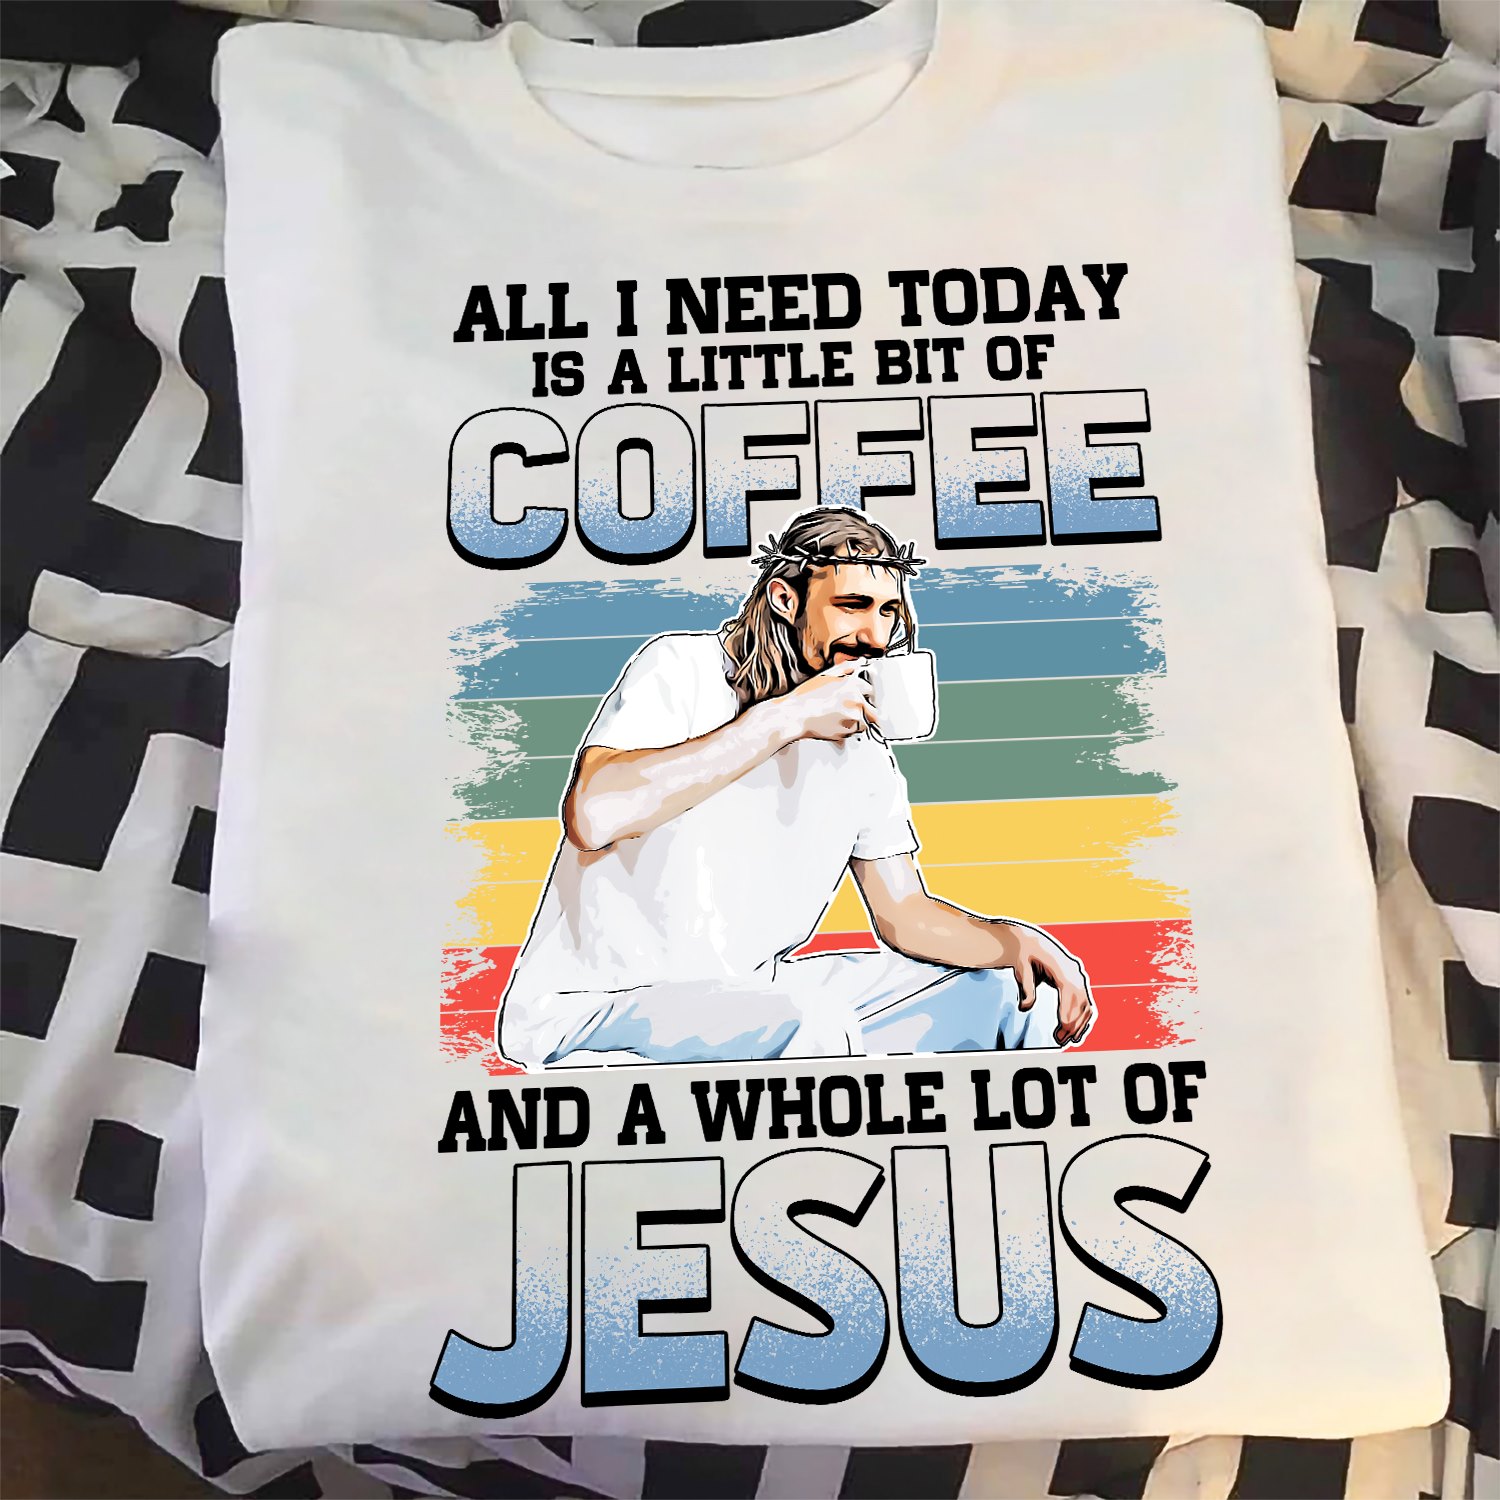 All I need today is a little bit of Coffee and a whole lot of Jesus